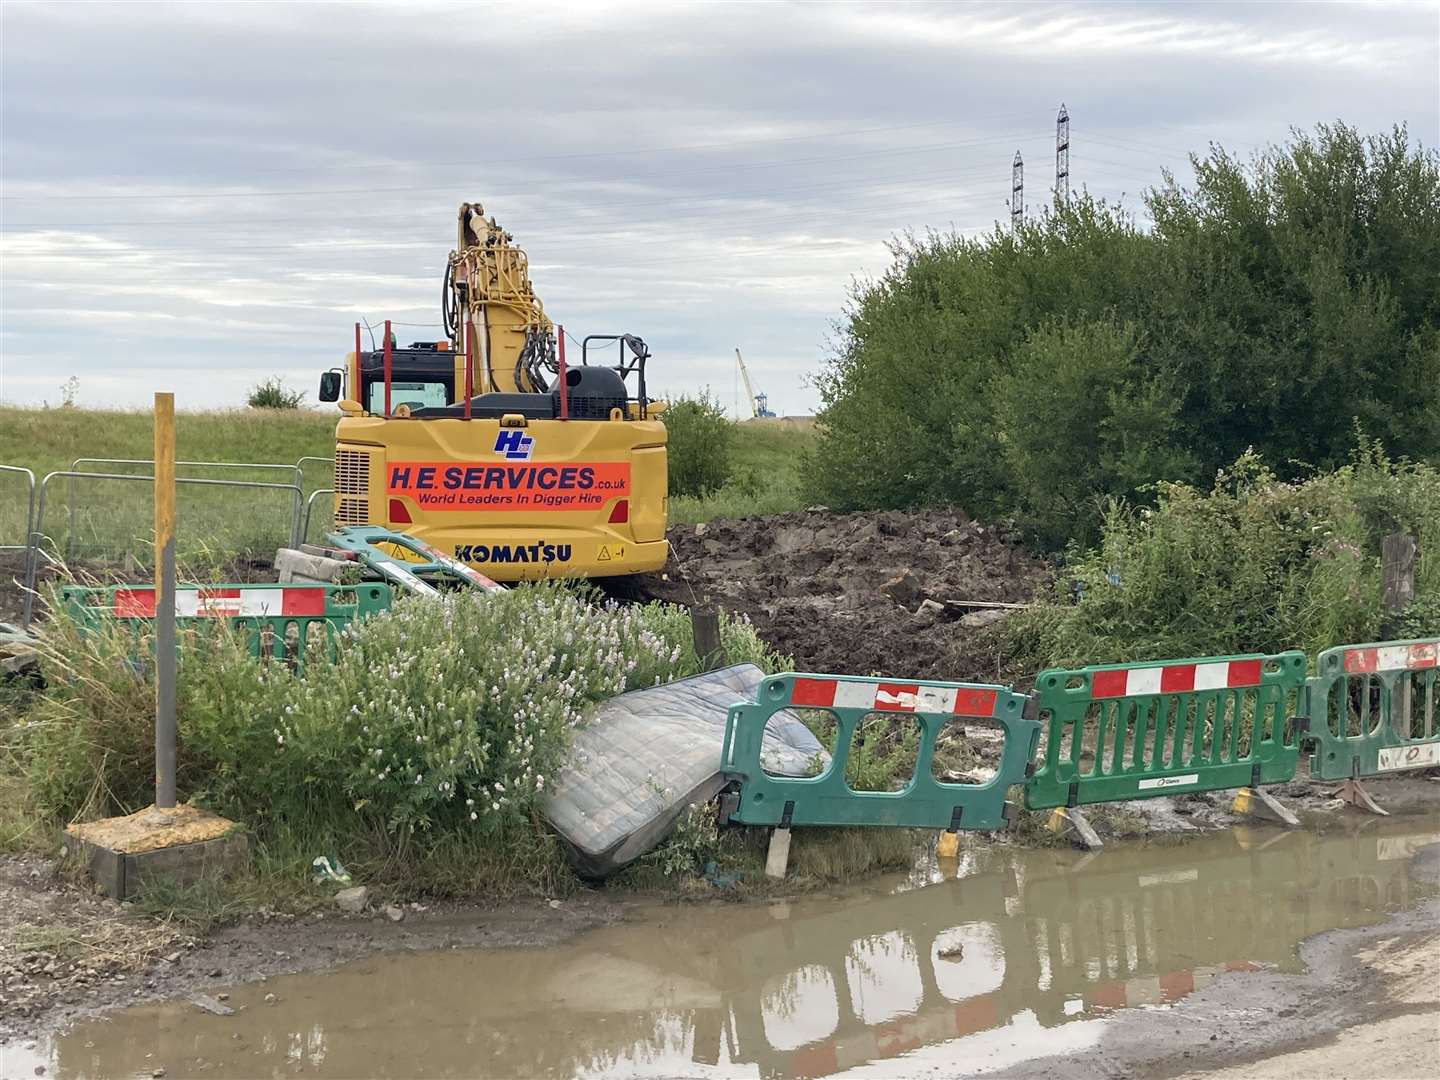 The first pipe burst was near Kingsferry Bridge which cut water supplies to Sheppey